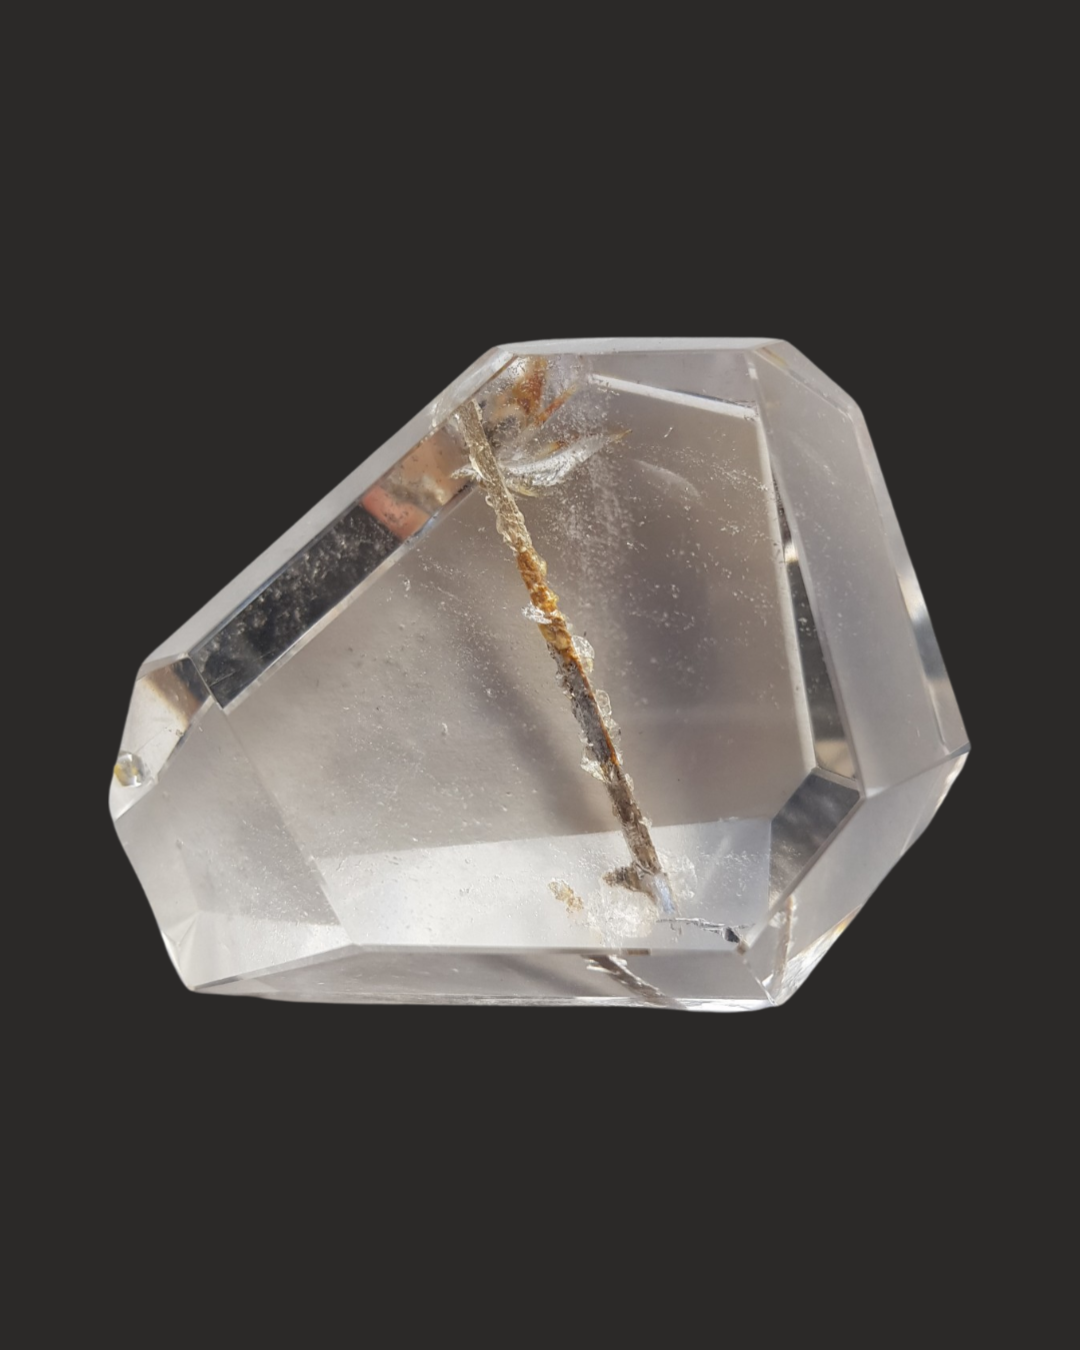 Clear Quartz Crystal with large epidote inclusion